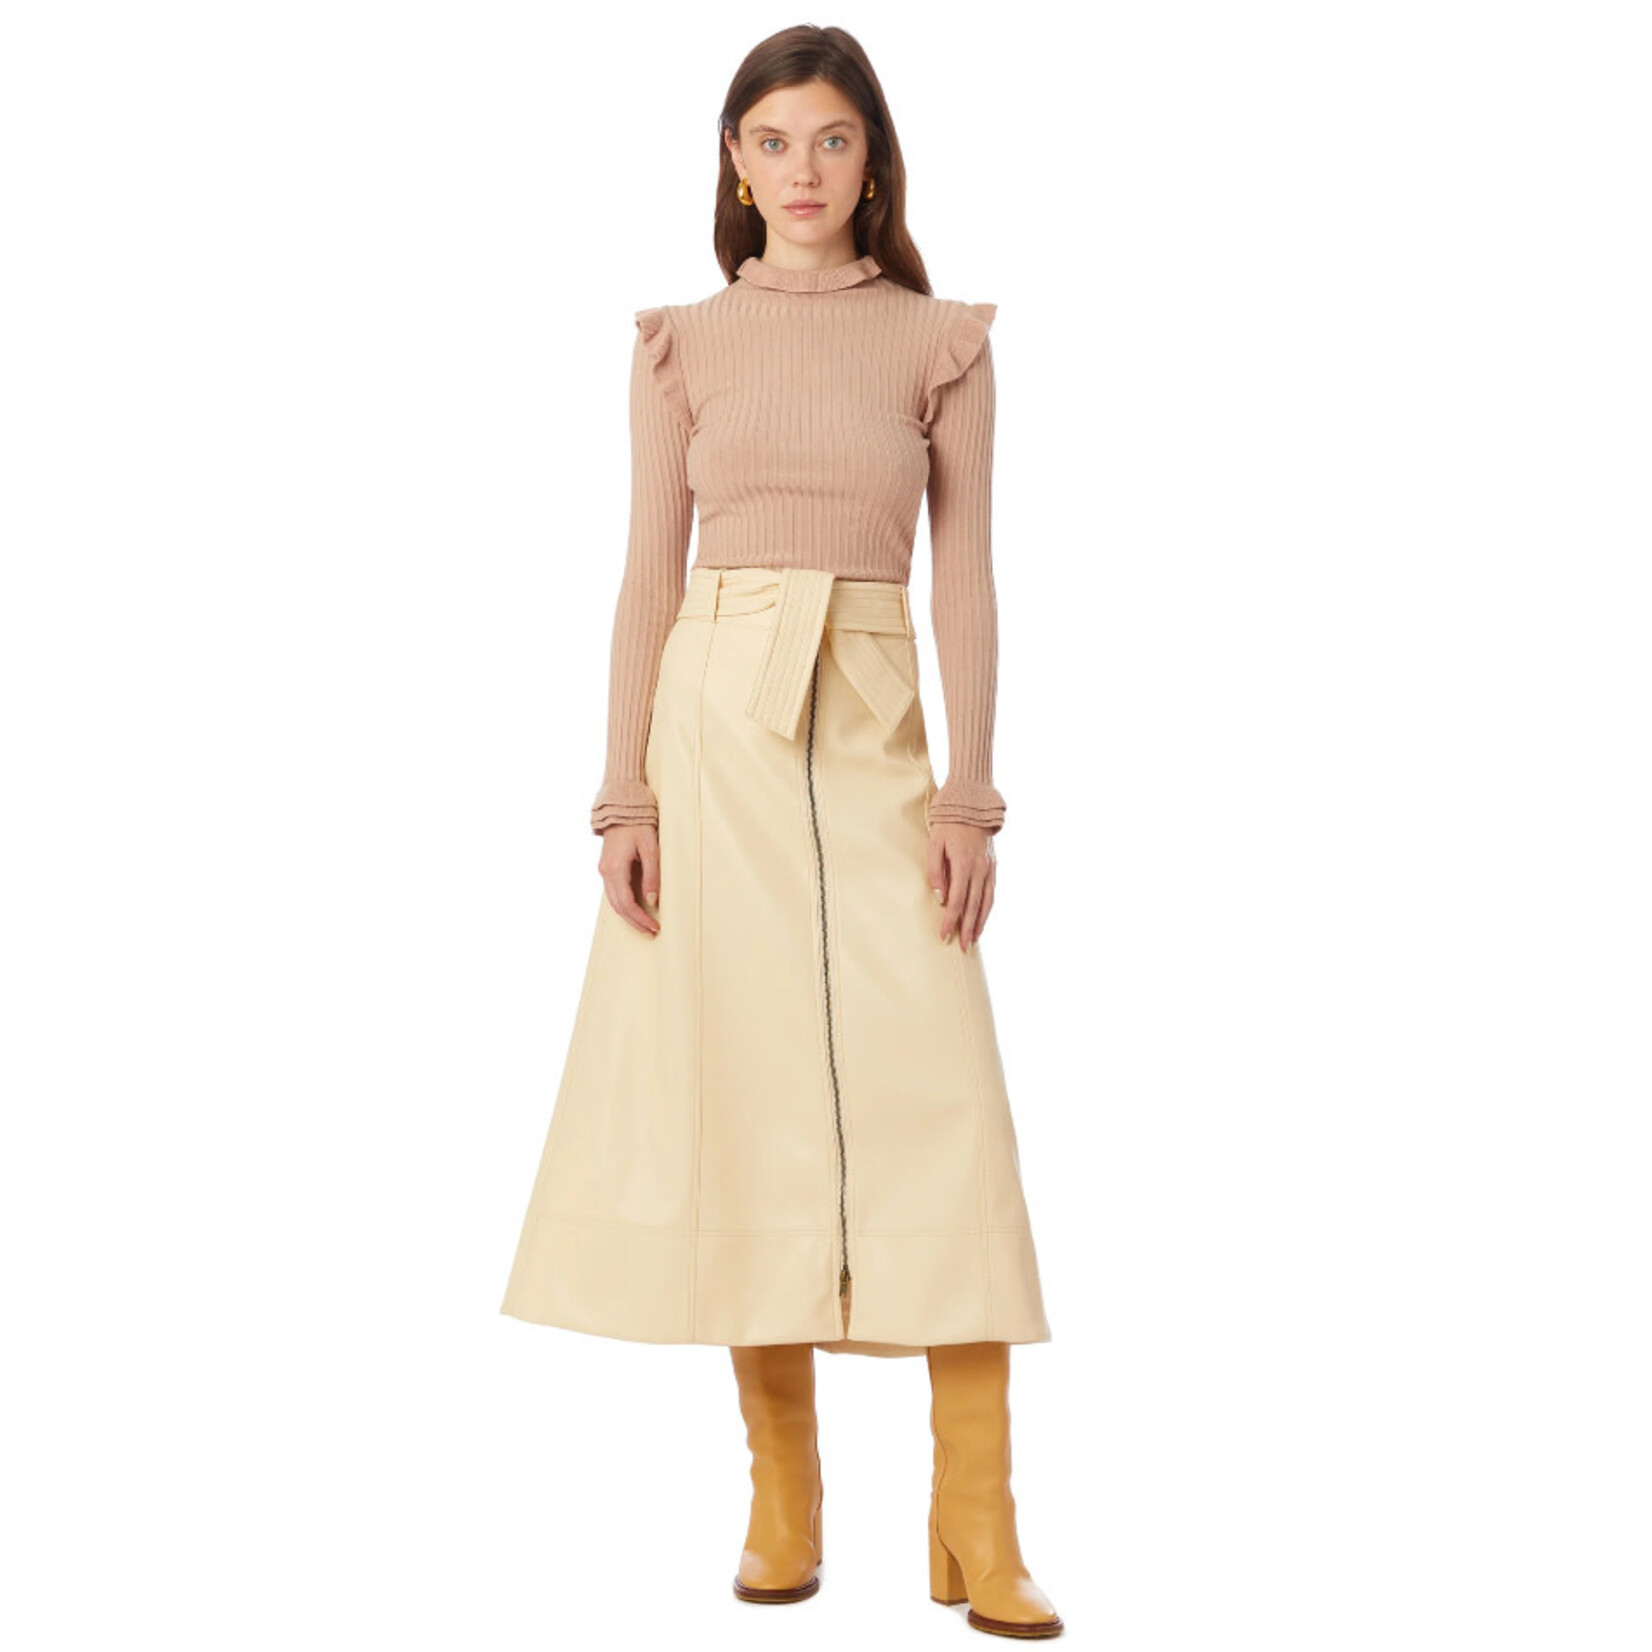 Marie Oliver Greenwich Skirt